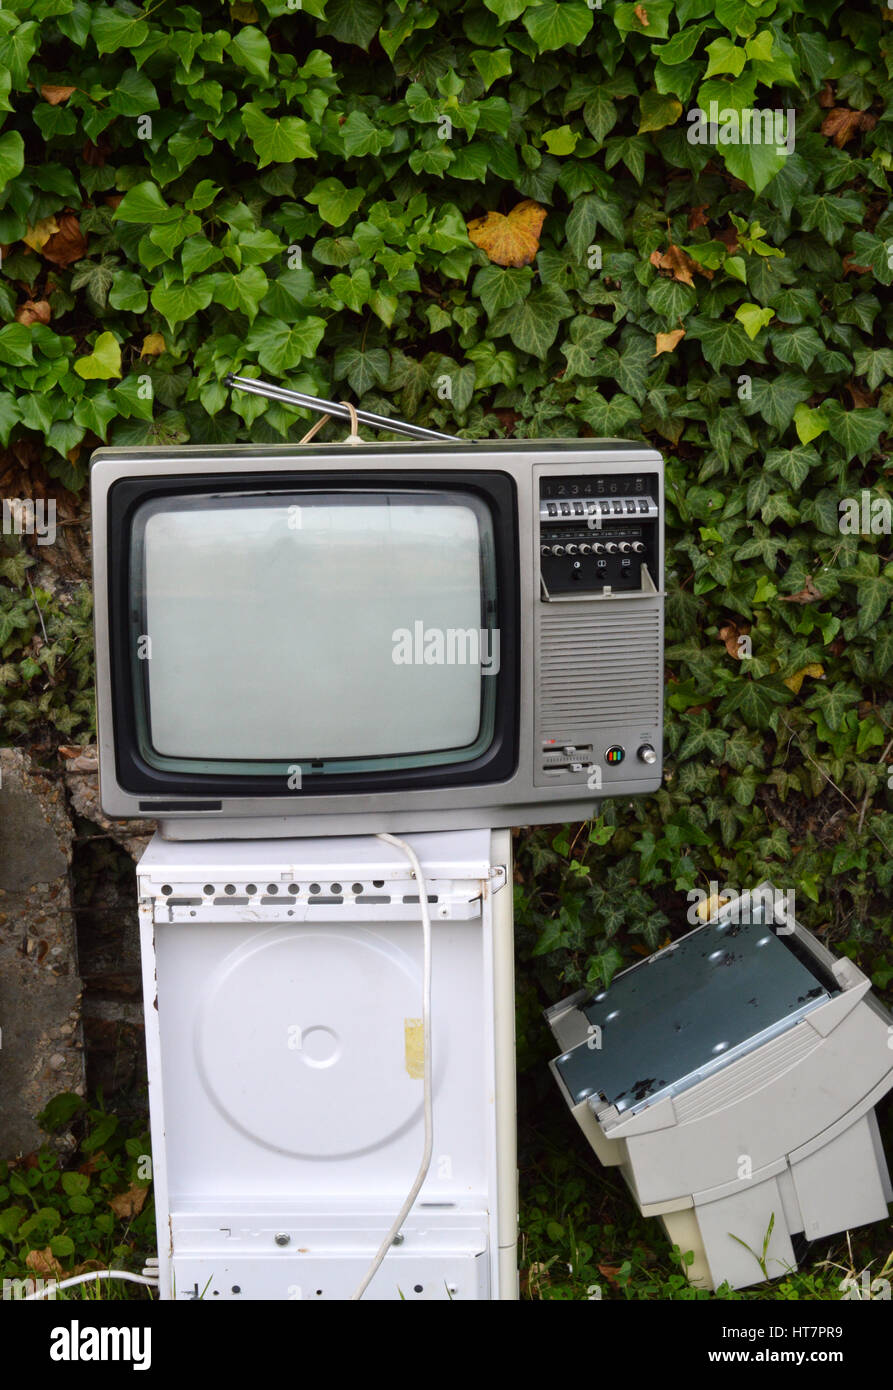 Electronic waste with vintage TV. Stock Photo